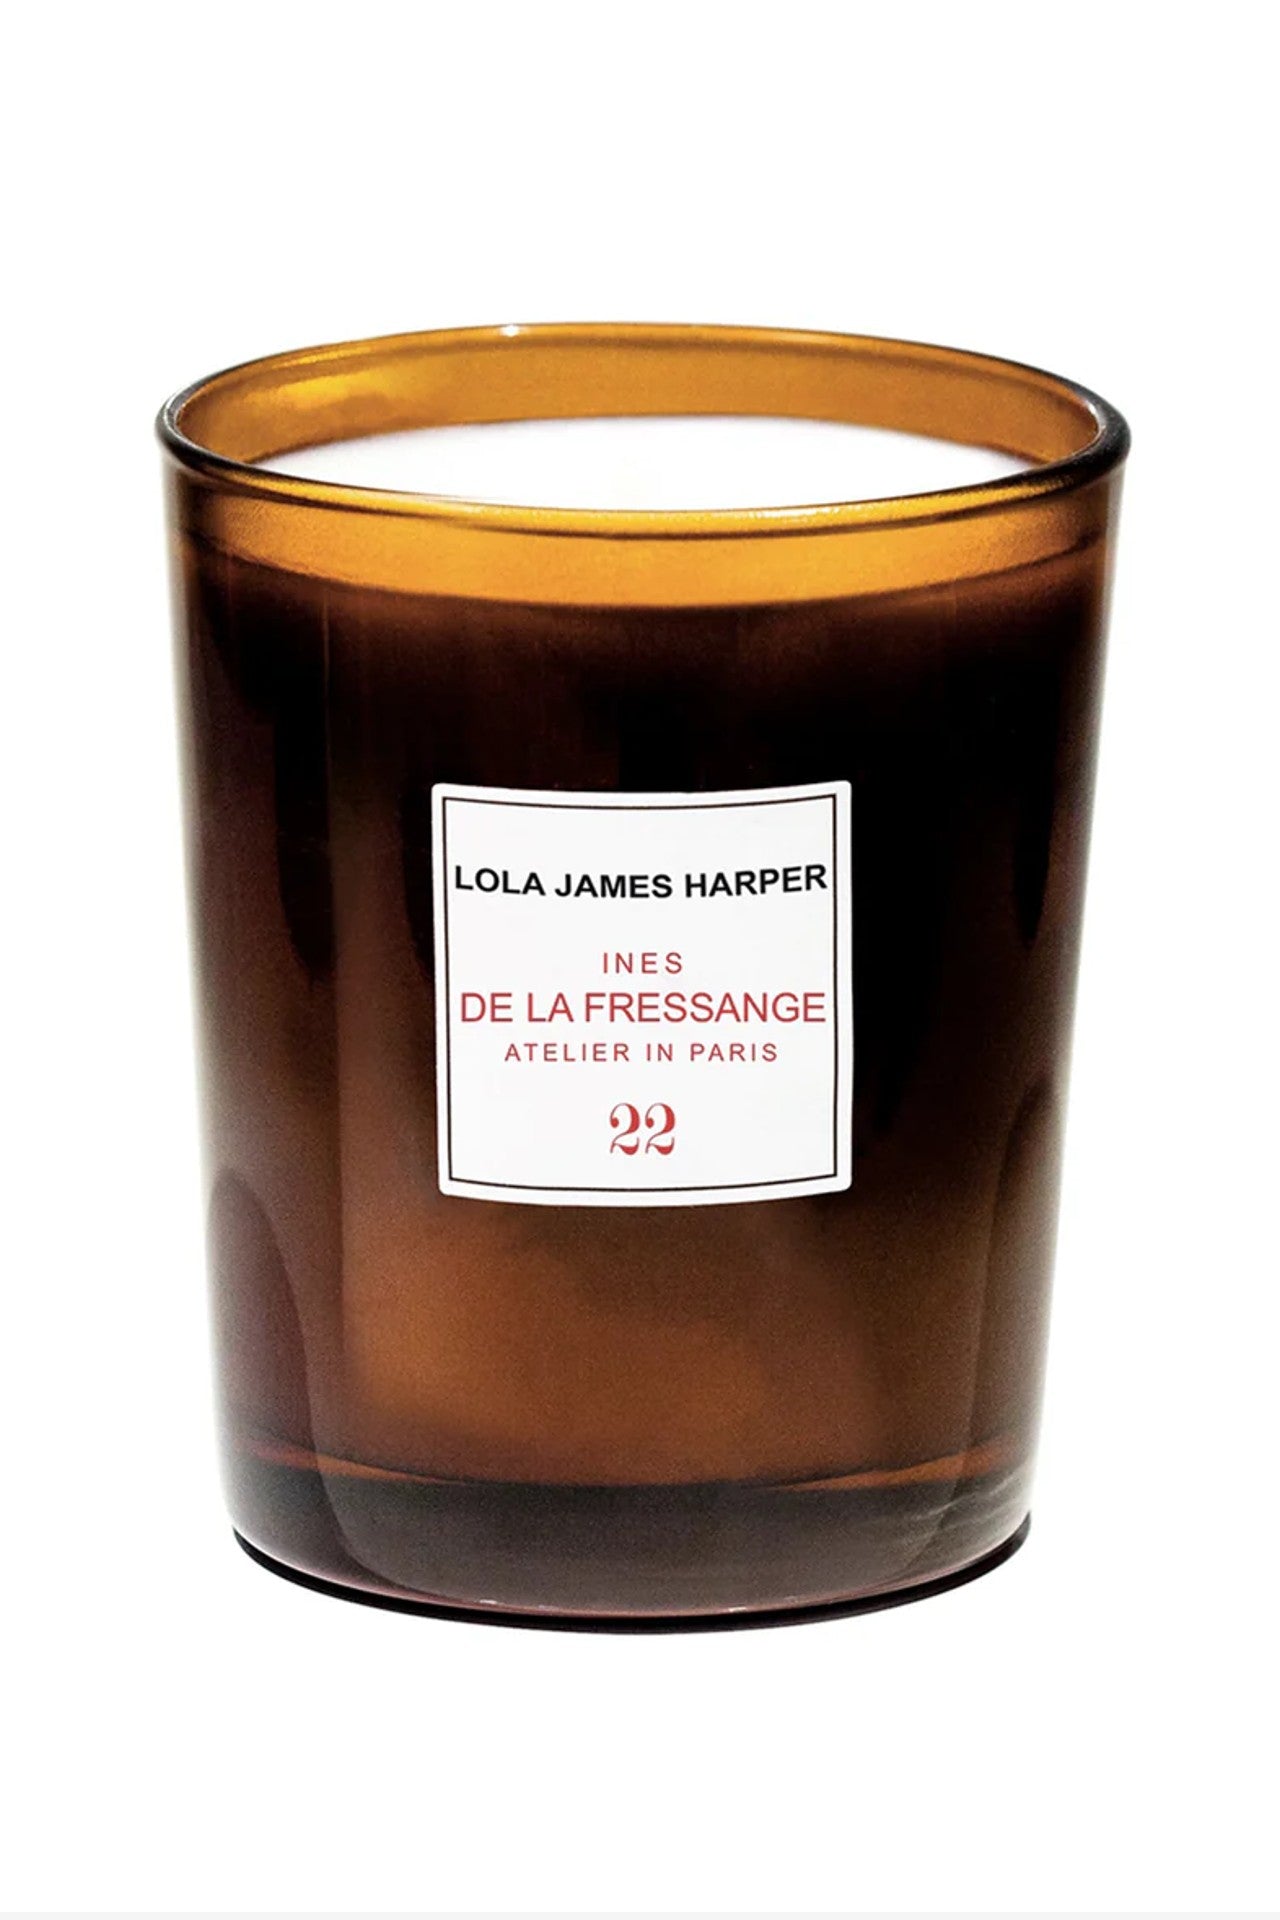 The Atelier In Paris Candle